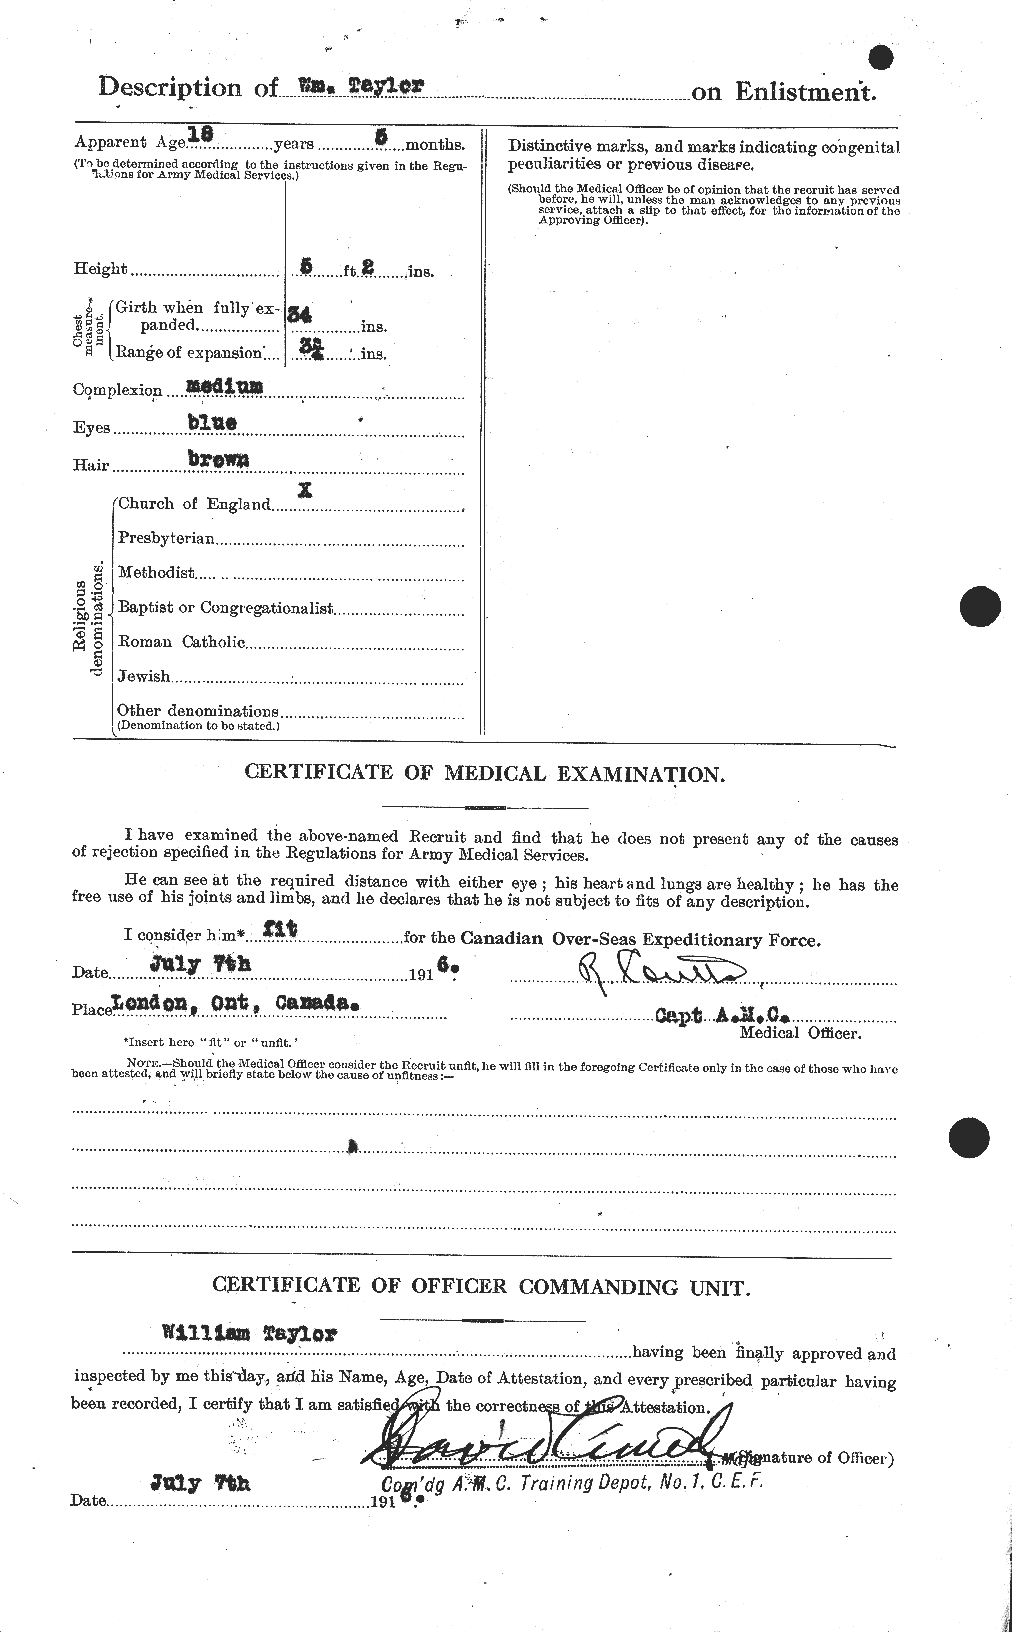 Personnel Records of the First World War - CEF 628117b